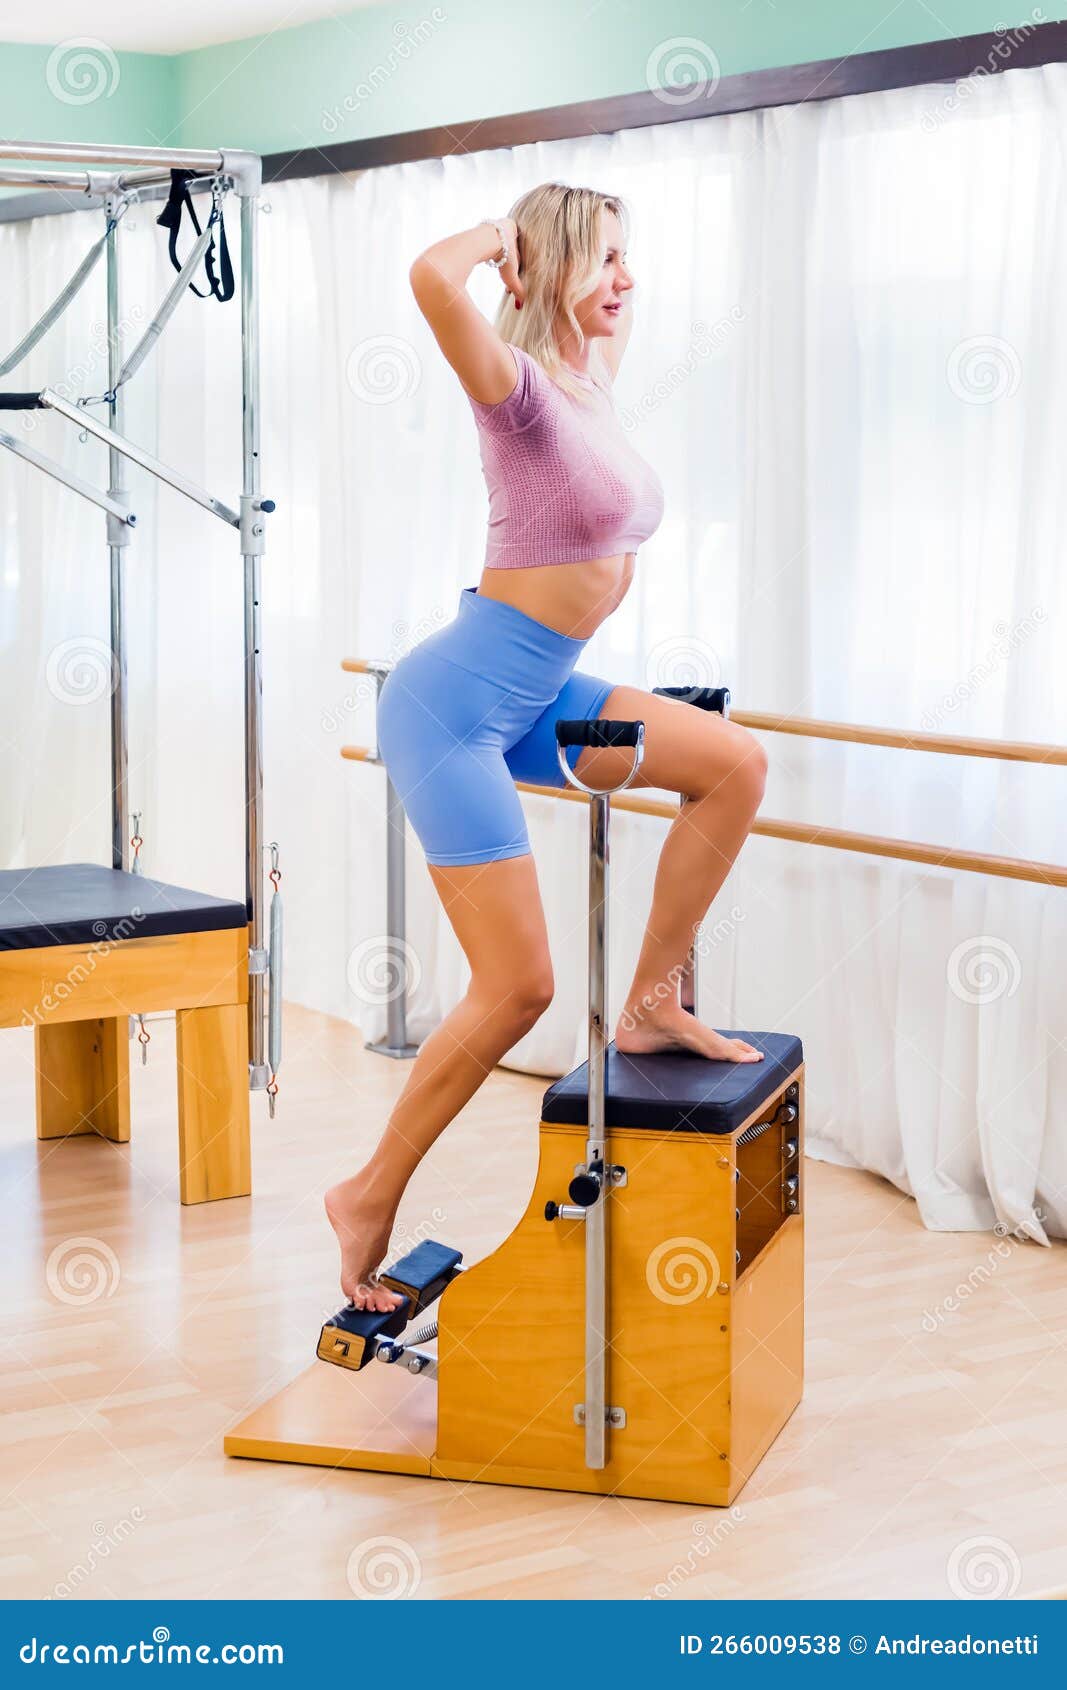 Fit Woman Exercising on Pilates Wunda Chair Stock Photo - Image of